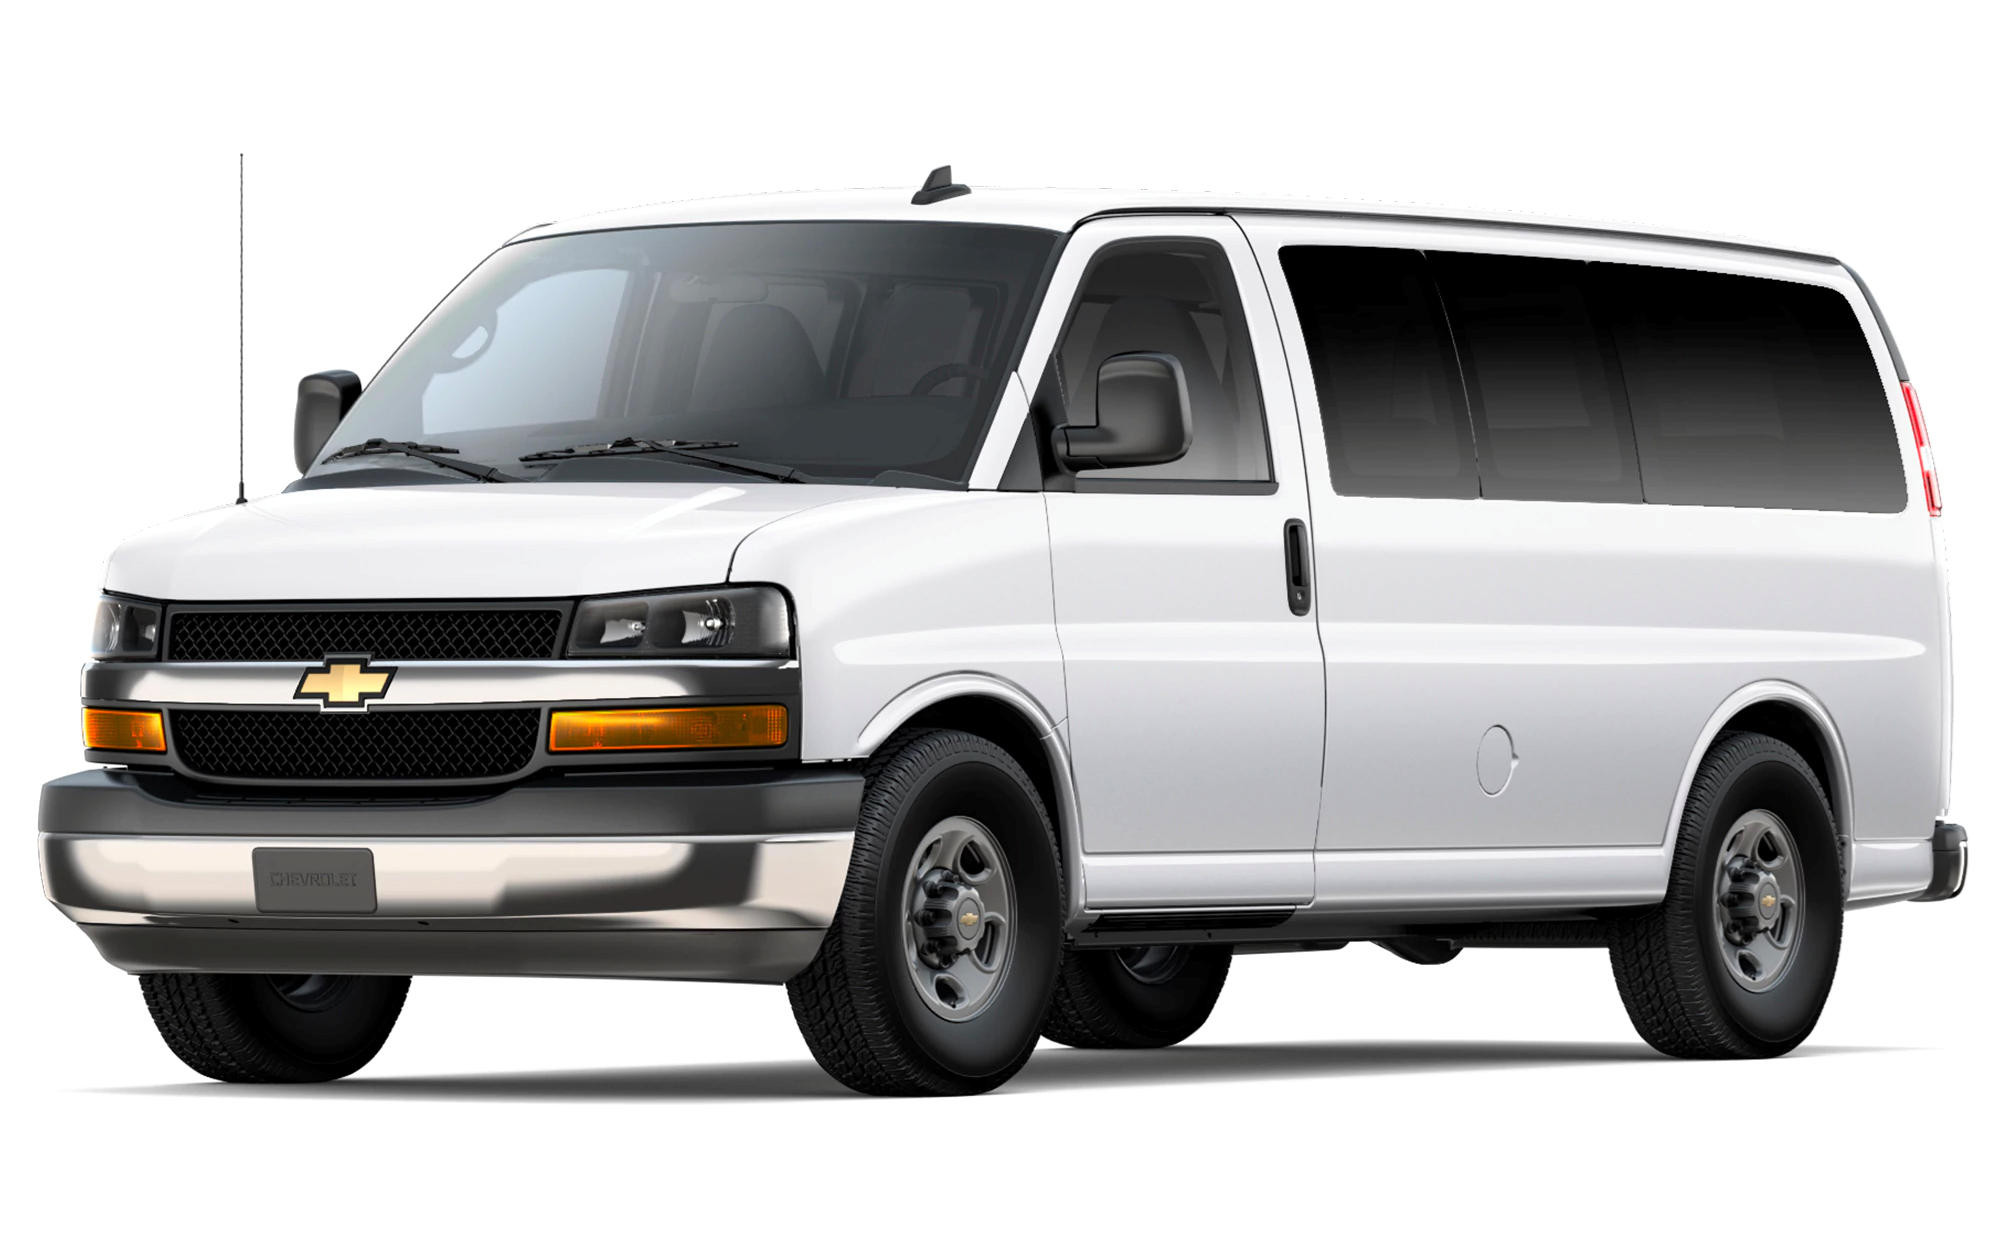 2019 Chevy Express 3500 6.0 Oil Capacity